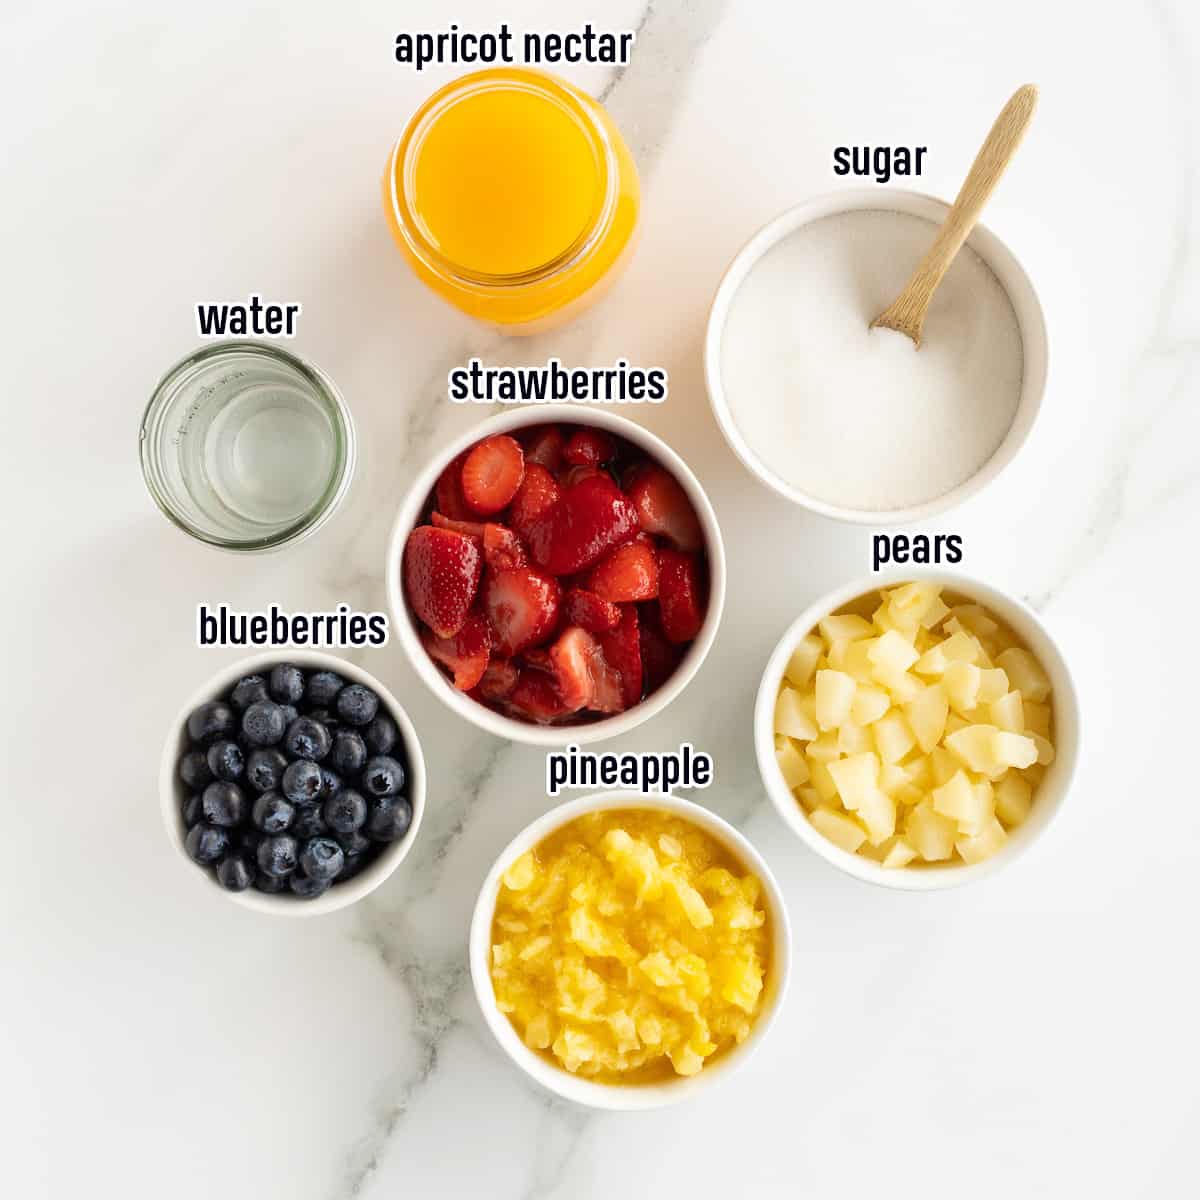 Apricot nectar, sugar, and fruit in bowls with text.